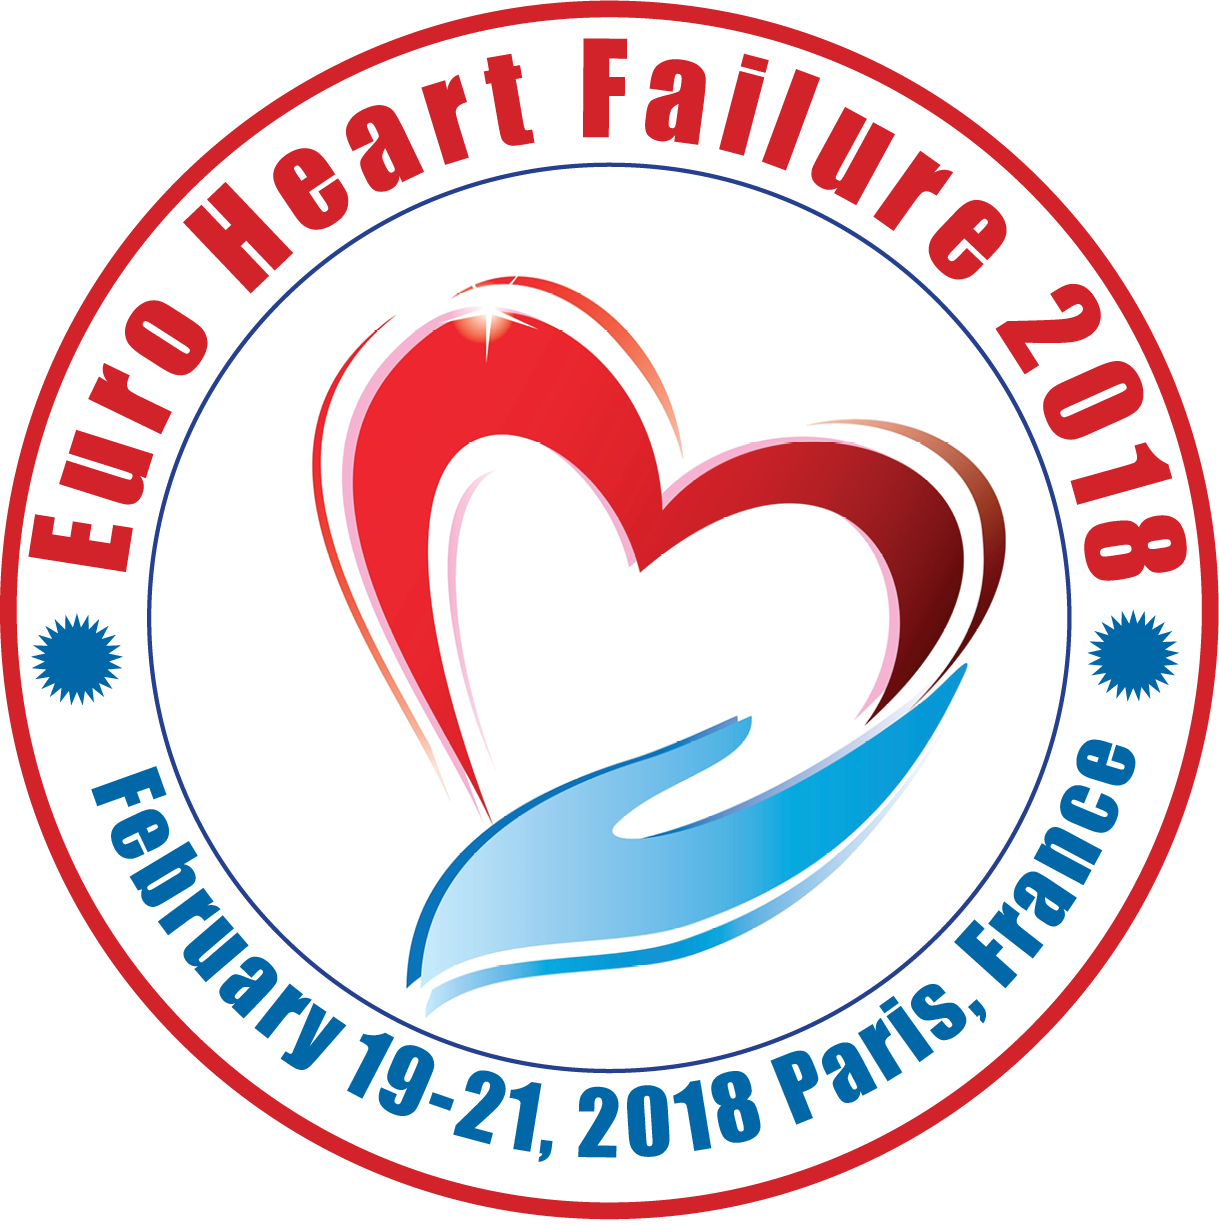 With the support of Euro Heart Failure 2017 Organizing Committee Members, the 23rd European Heart Disease and Heart Failure Congress (Euro Heart Failure 2018) is scheduled to be held in Paris, France during February 19-21, 2018. Heart Conferences will lay a platform for world-class professors, cardiologists, heart doctors, cardiac surgeons and scientists to discuss an approach for heart diseases and heart failure. So, Euro Heart Failure 2018 welcomes the, Professors, Research scholars, Industrial Professionals, Cardiac surgeons, Cardiologists, vascular biologists, physicians, and student delegates from cardiology and healthcare sectors to be a part of it.